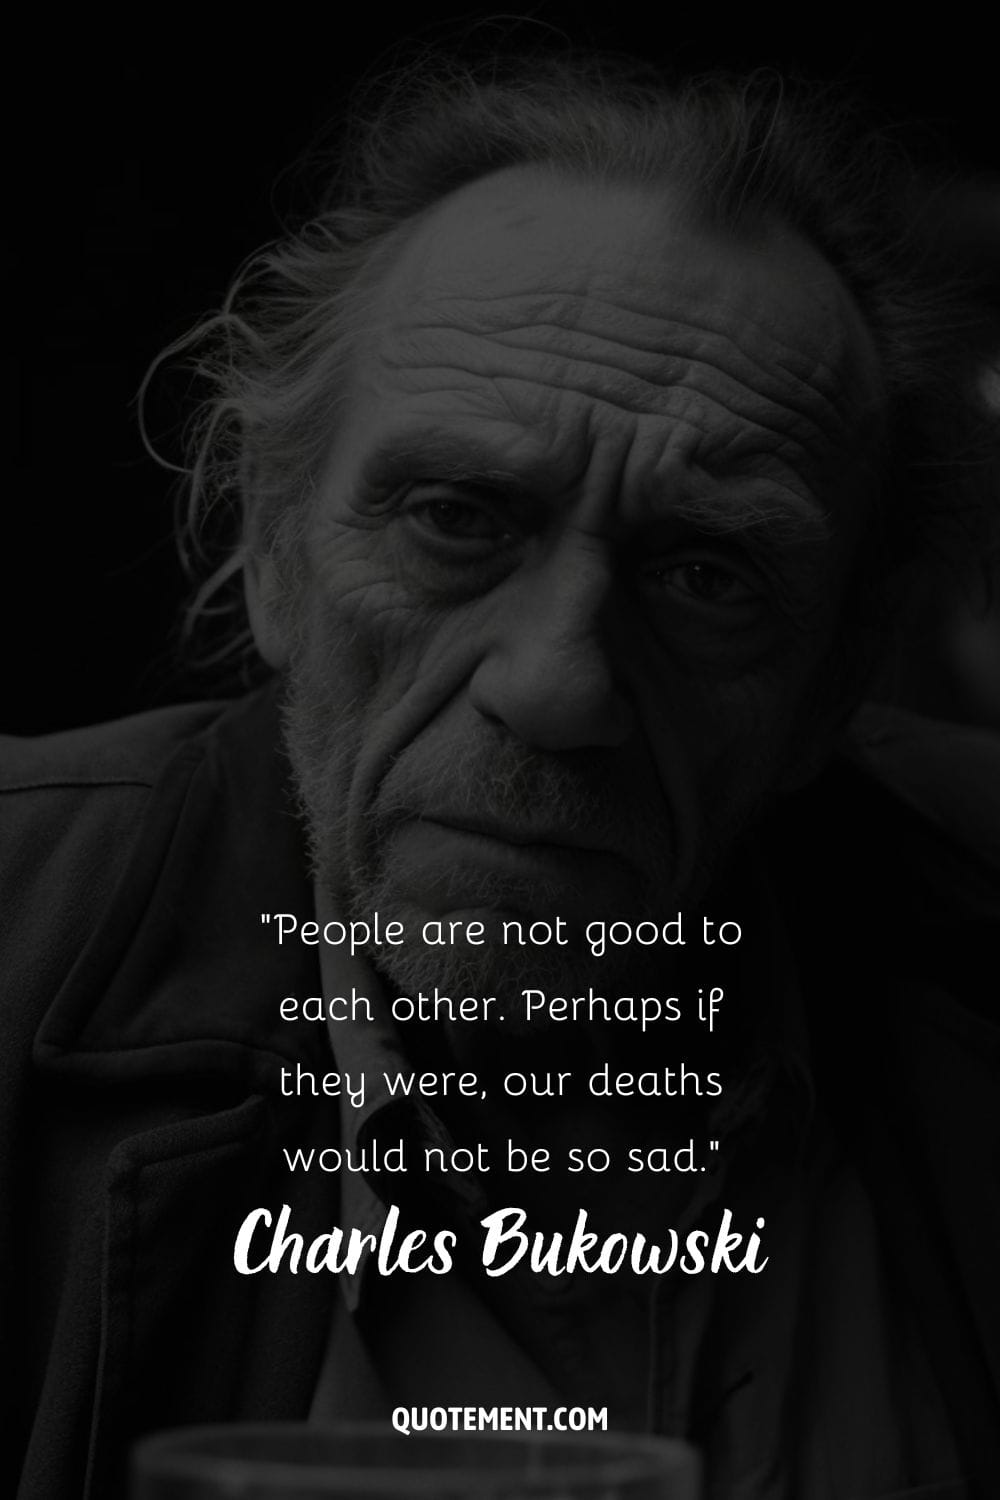 Charles Bukowski's solemn and contemplative face